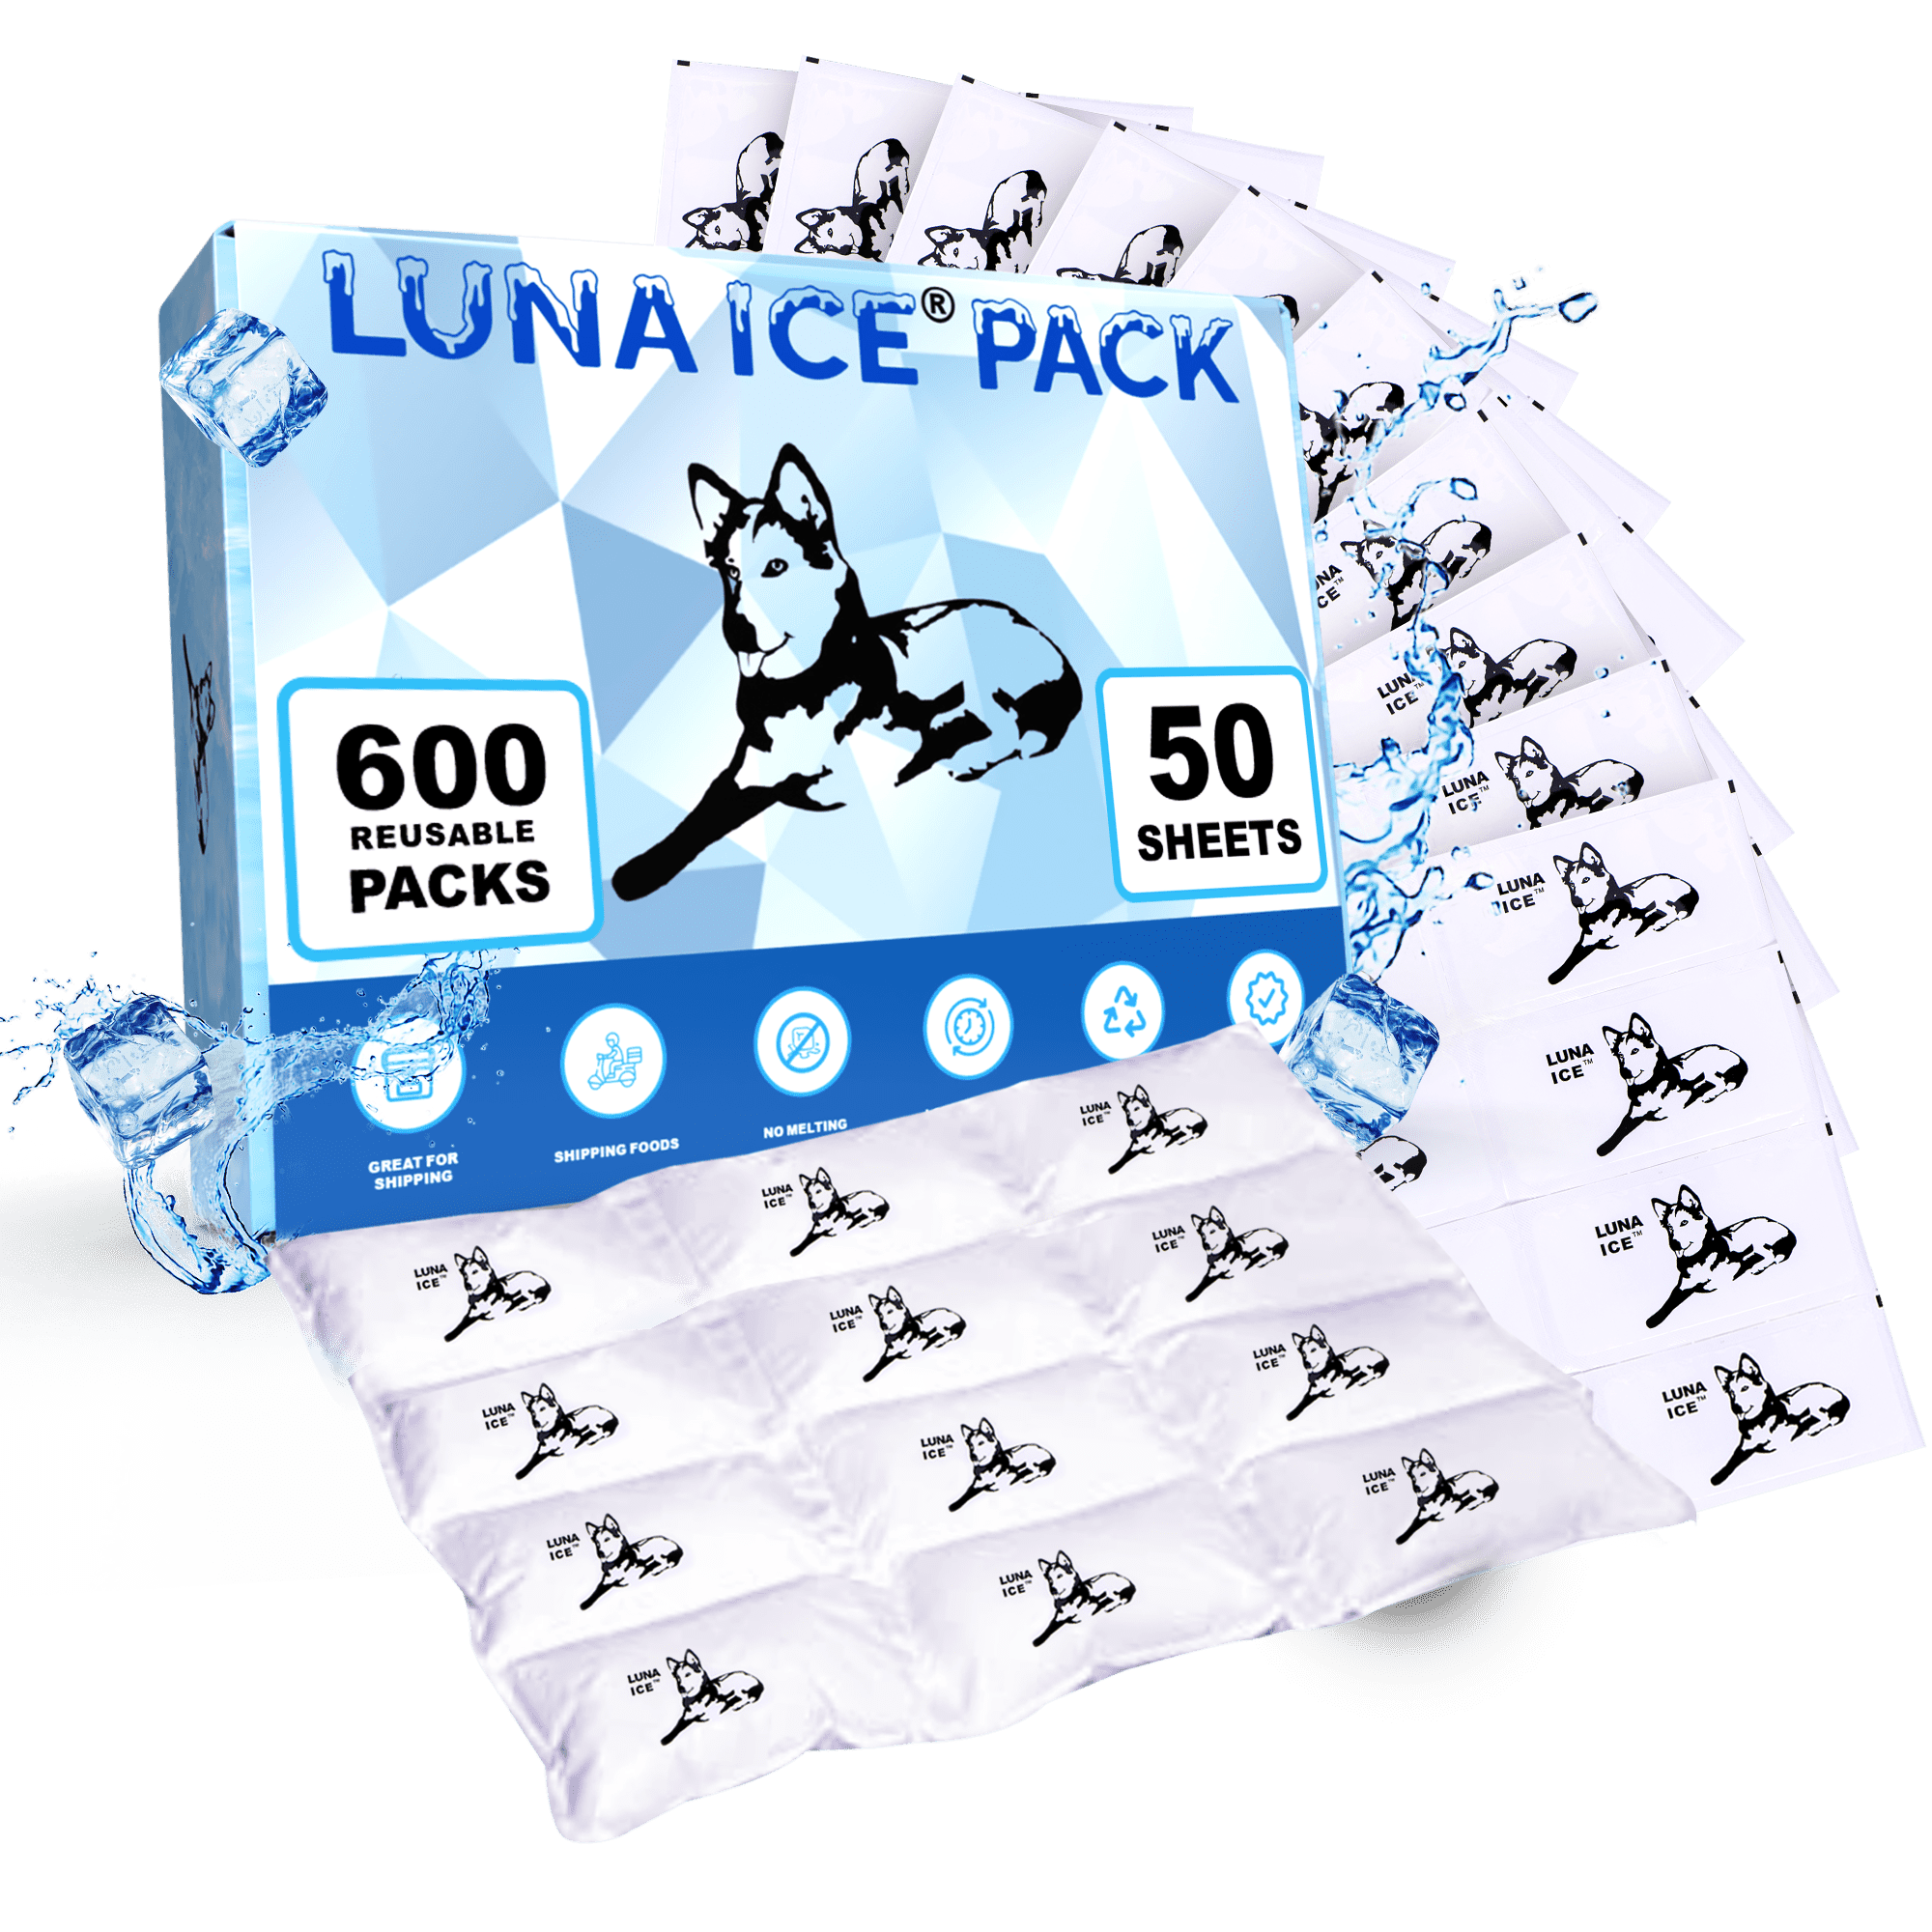 Luna Ice Gel Ice Packs - Dry Ice for Shipping Frozen Food, Lunch Bags & Injuries - Reusable & Long-Lasting Cold Packs for Coolers, Ice Bag for